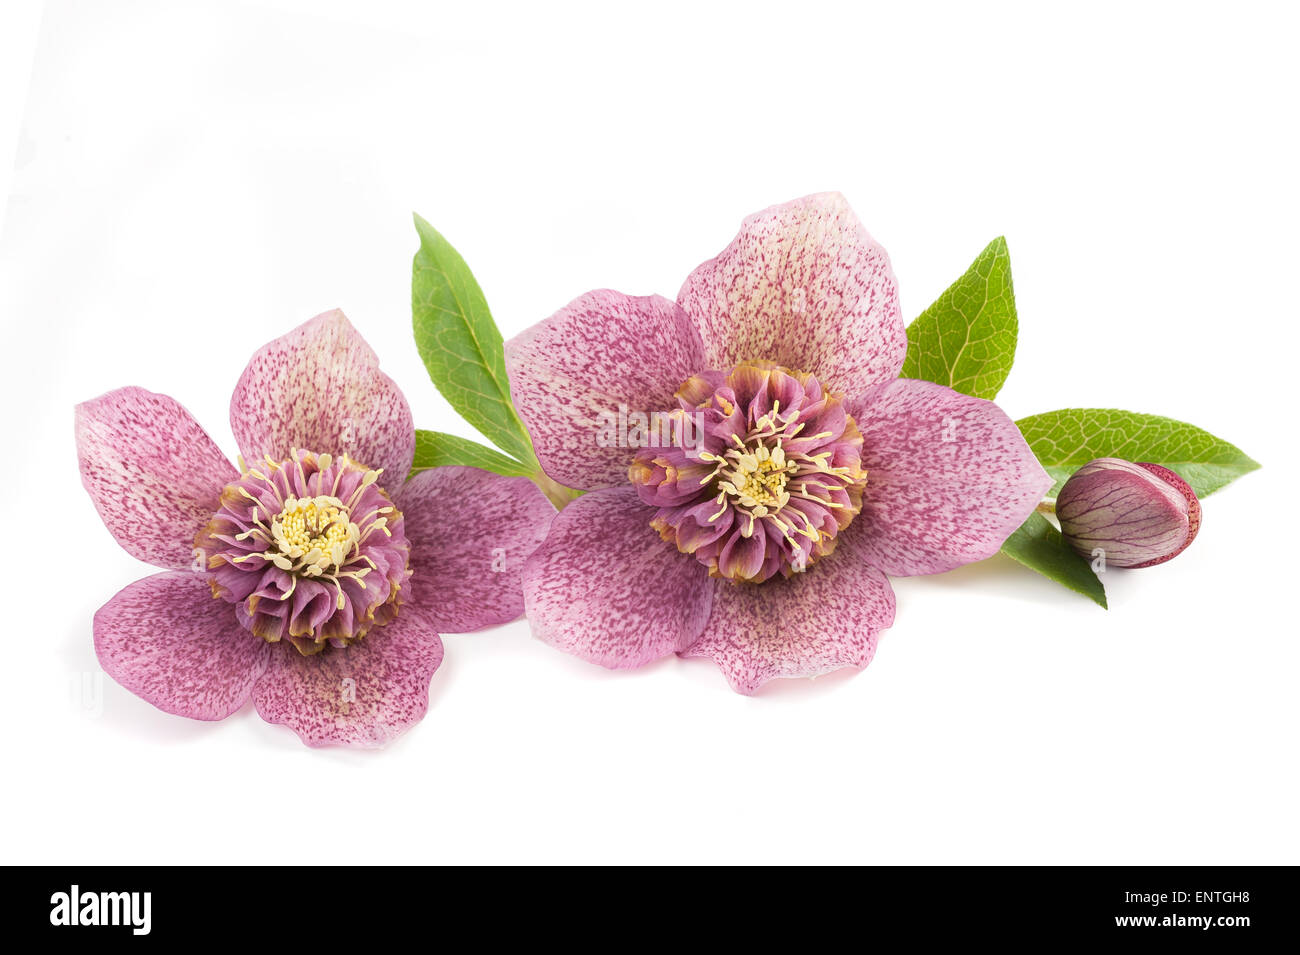 Hellebore flowers with bud isolated on white Stock Photo